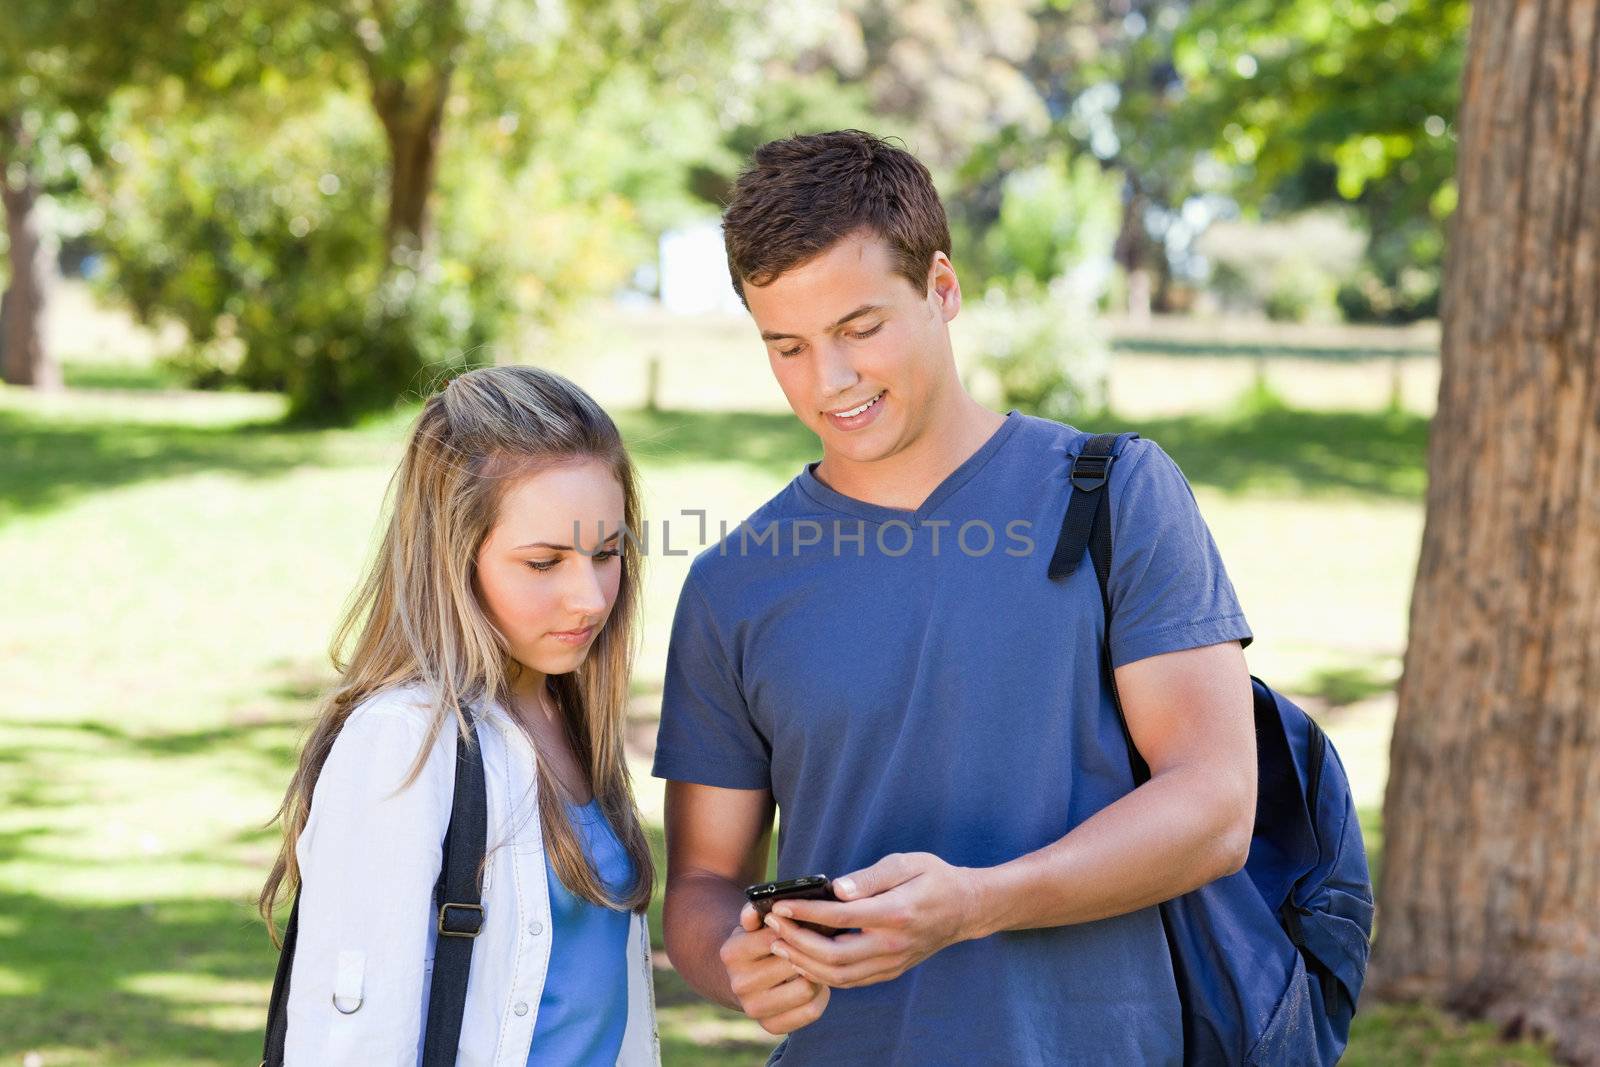 Close-up of a student showing his smartphone to a girl in a park